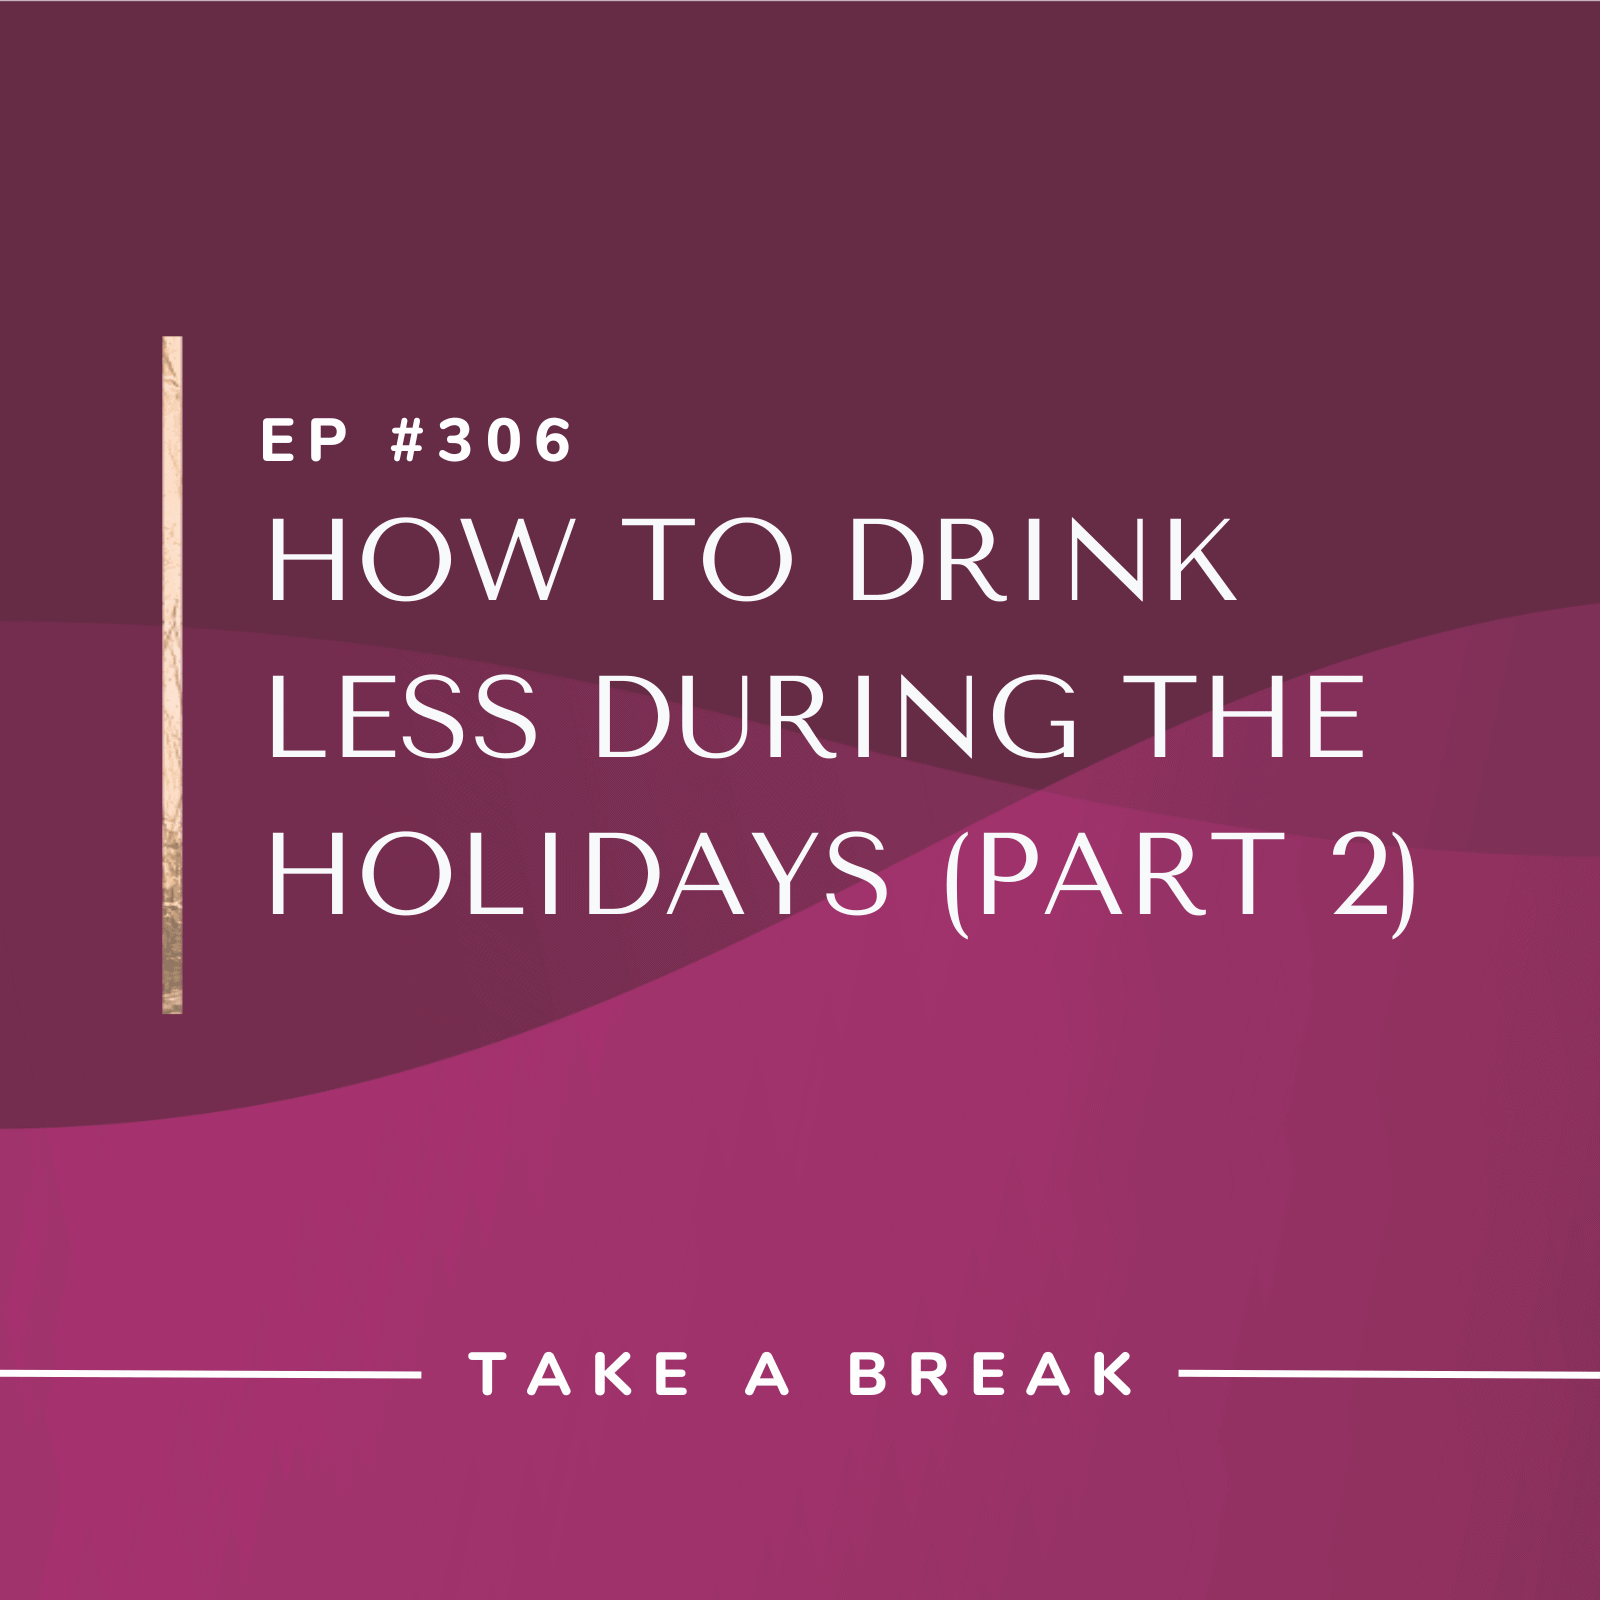 Take A Break from Drinking with Rachel Hart | How To Drink Less During The Holidays (Part 2)